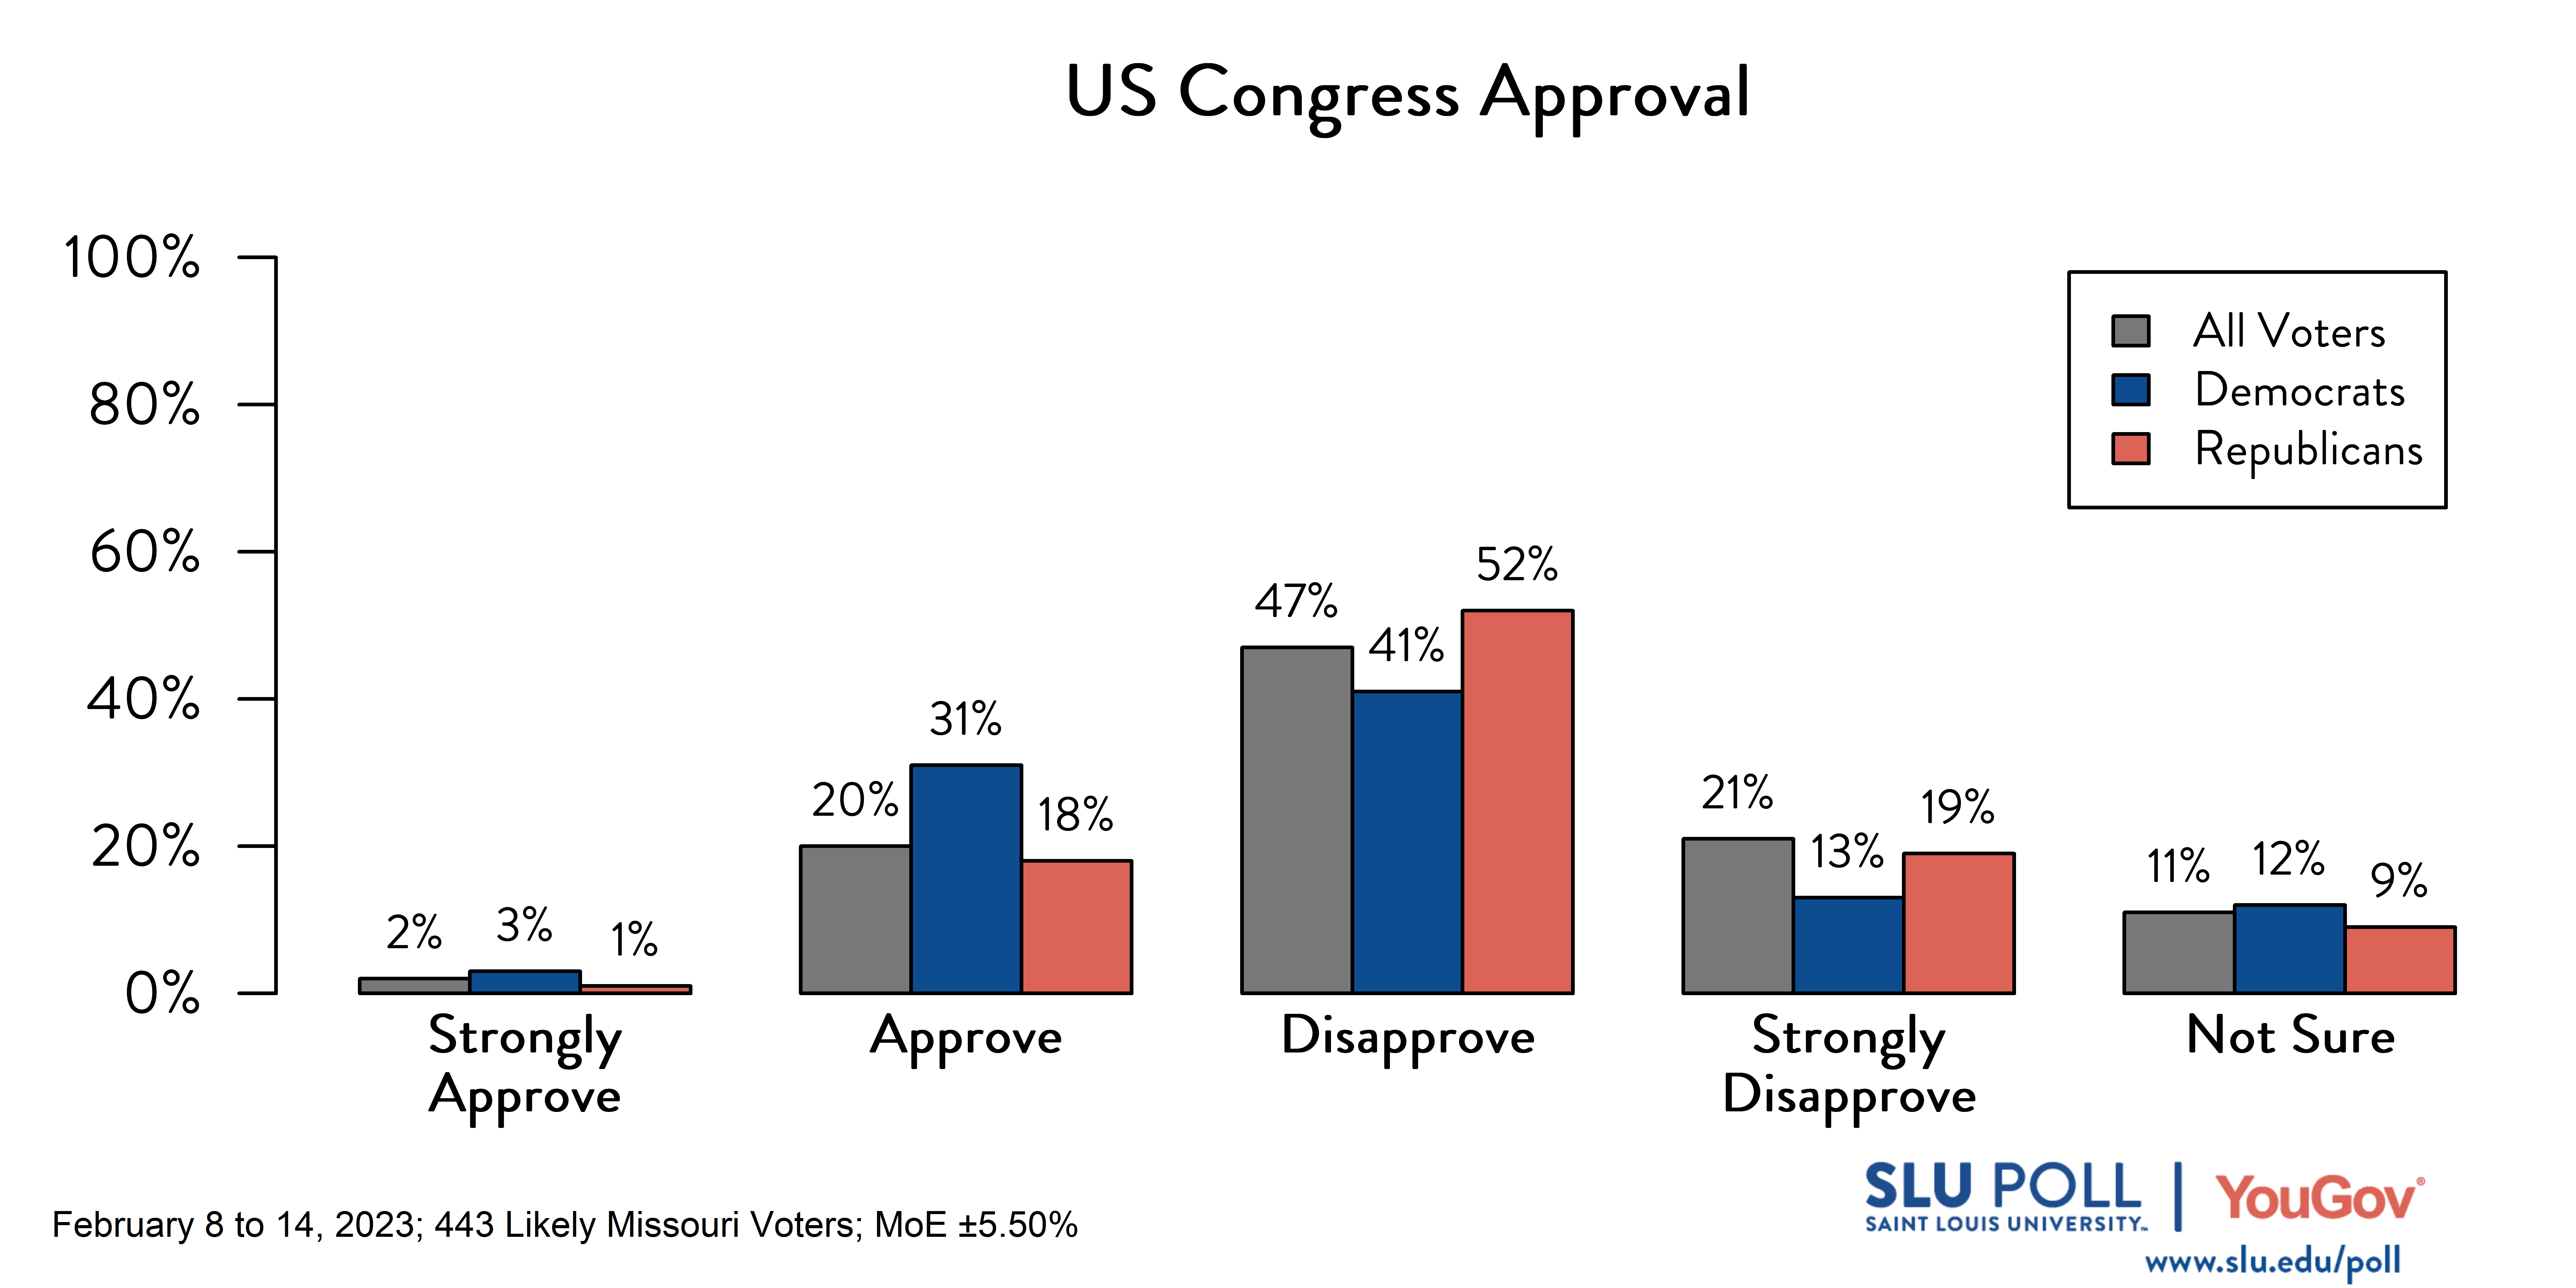 Likely voters' responses to 'Do you approve or disapprove of the way each is doing their job: The US Congress?': 2% Strongly approve, 20% Approve, 47% Disapprove, 21% Strongly disapprove, and 11% Not sure. Democratic voters' responses: ' 3% Strongly approve, 31% Approve, 41% Disapprove, 13% Strongly disapprove, and 12% Not sure. Republican voters' responses: 1% Strongly approve, 18% Approve, 52% Disapprove, 19% Strongly disapprove, and 9% Not sure. 